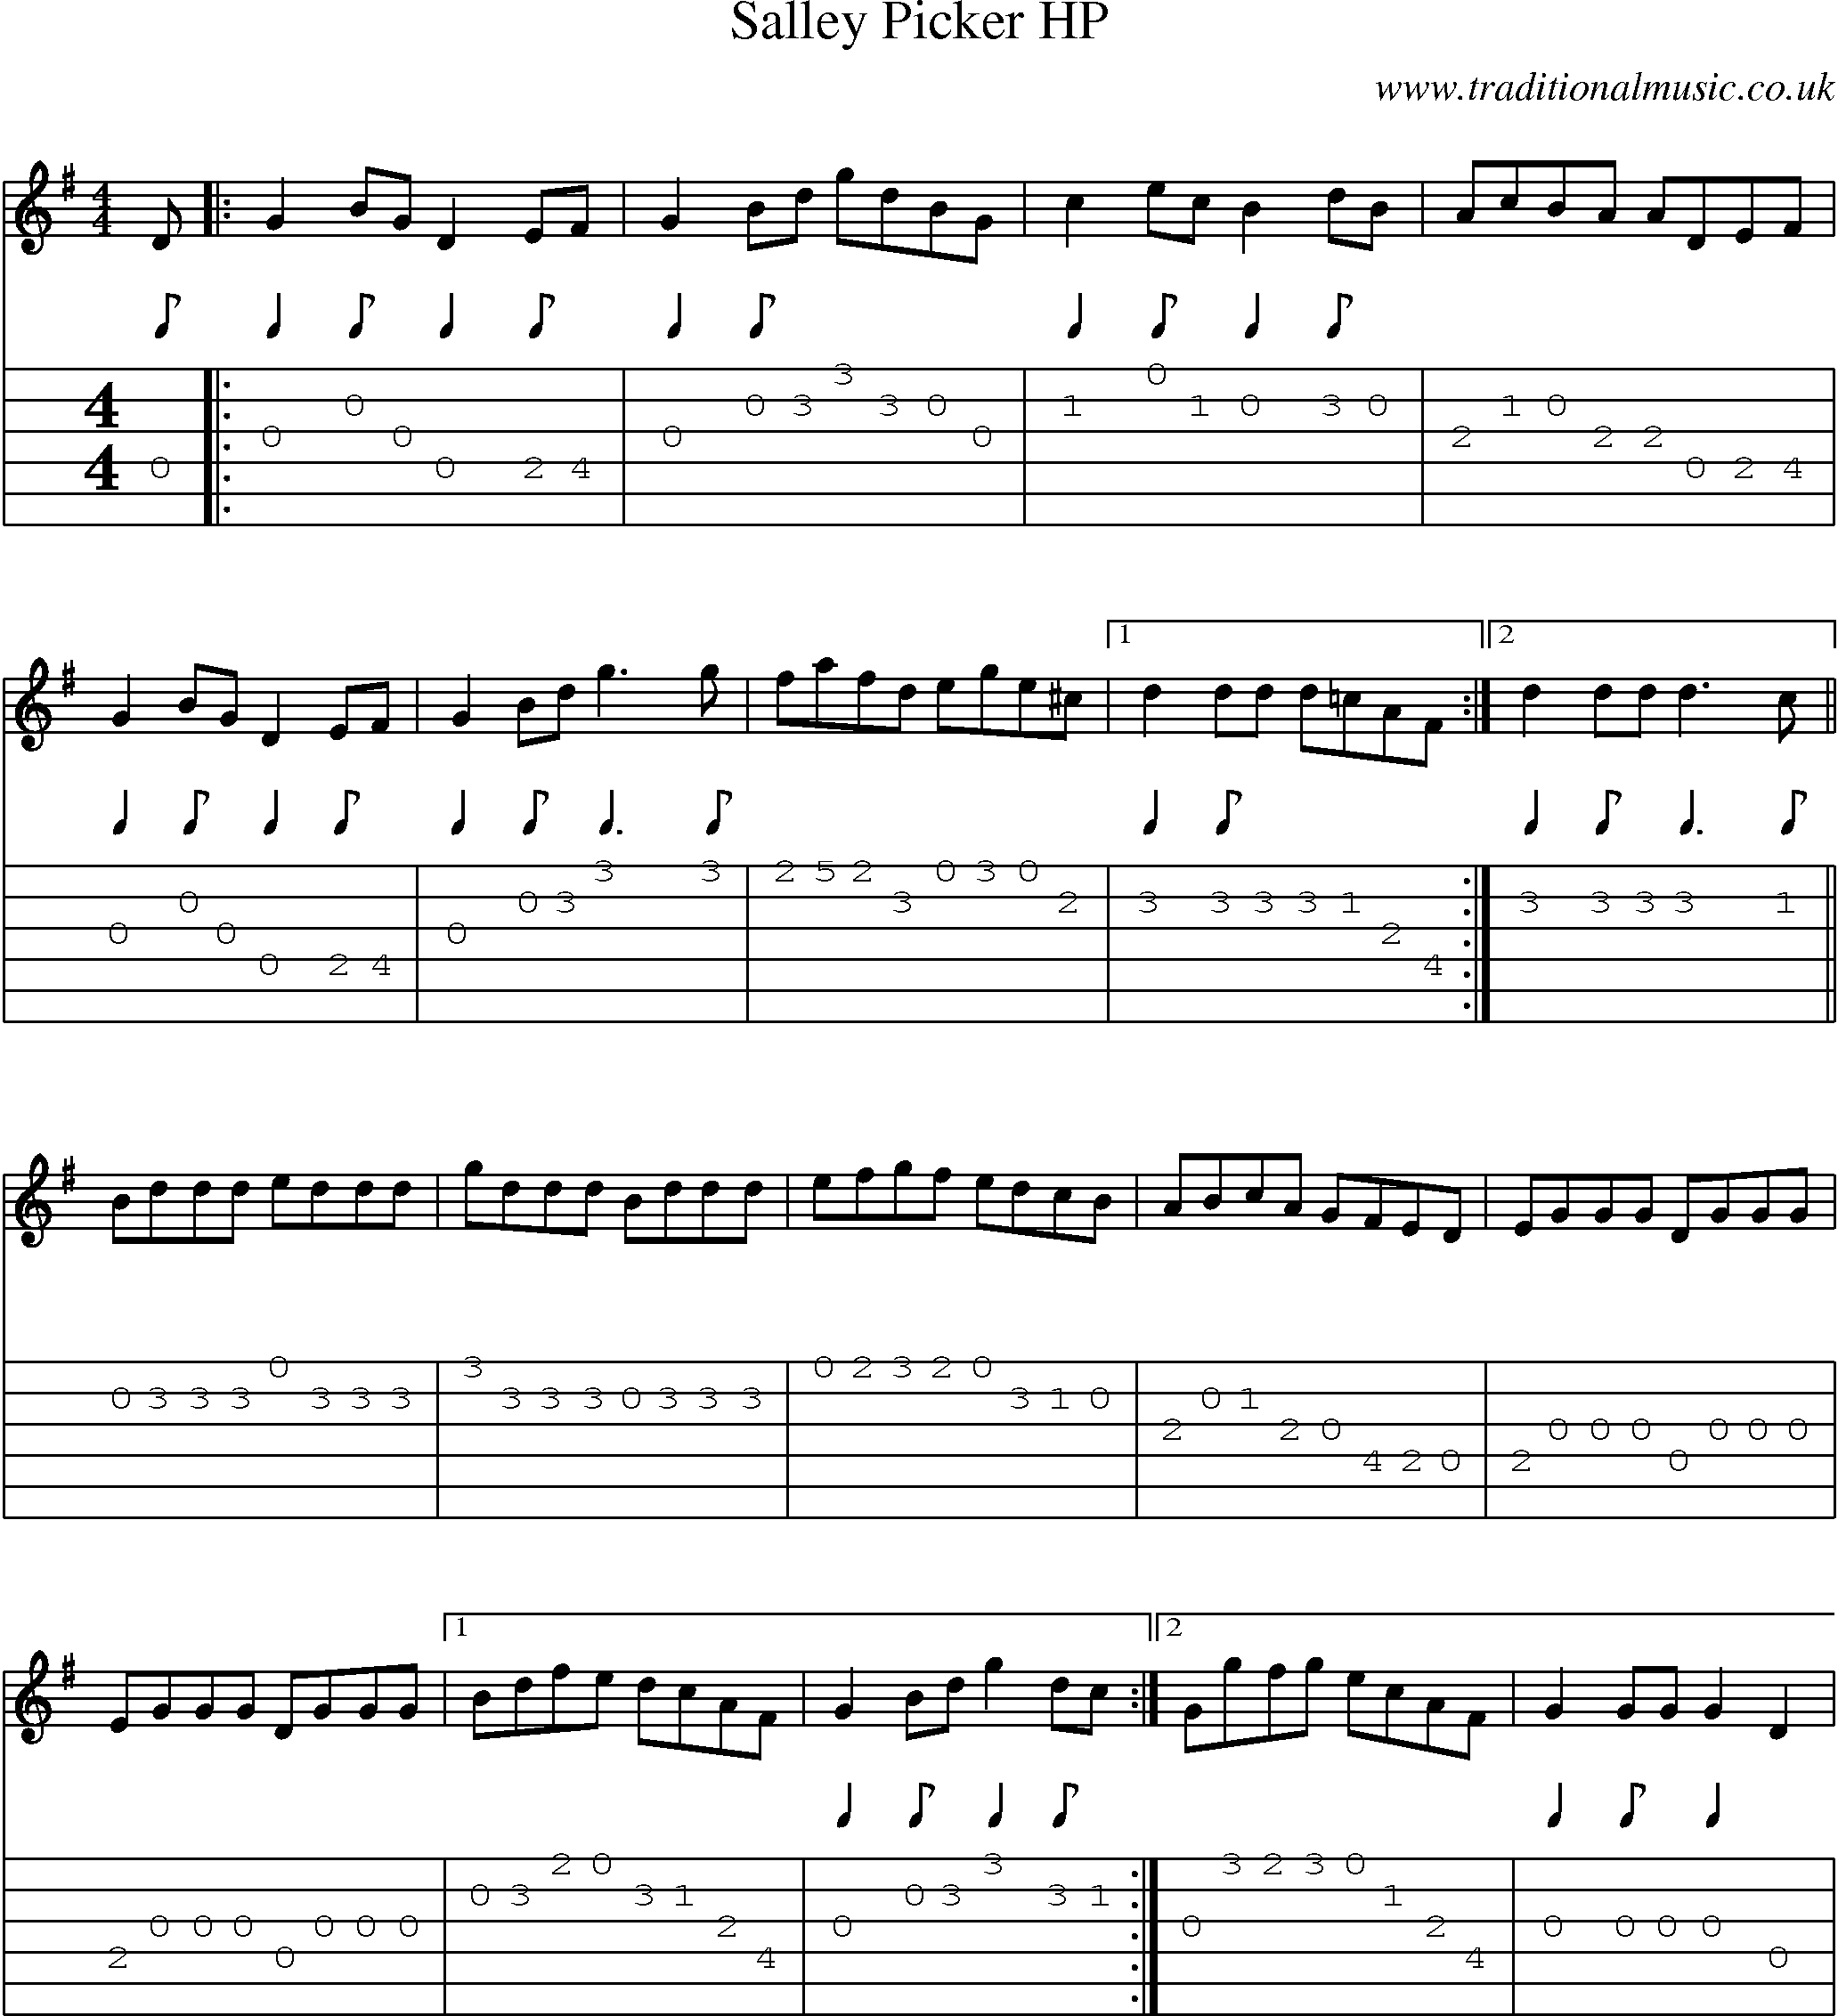 Music Score and Guitar Tabs for Salley Picker